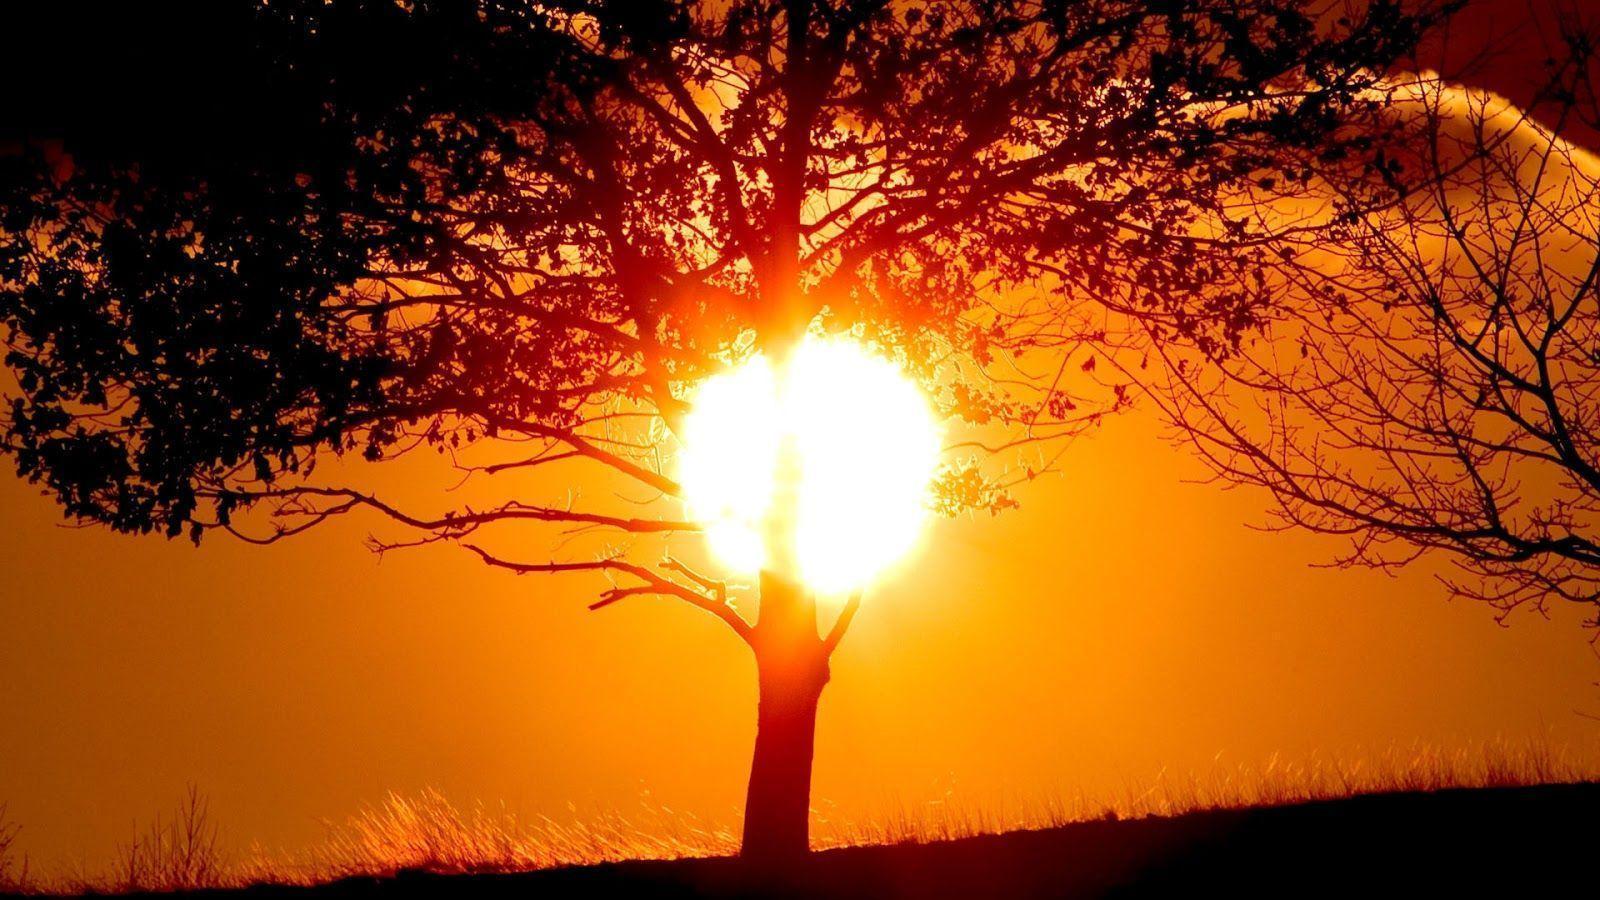 HD wallpaper with a tree at sunset HD Wallpaper